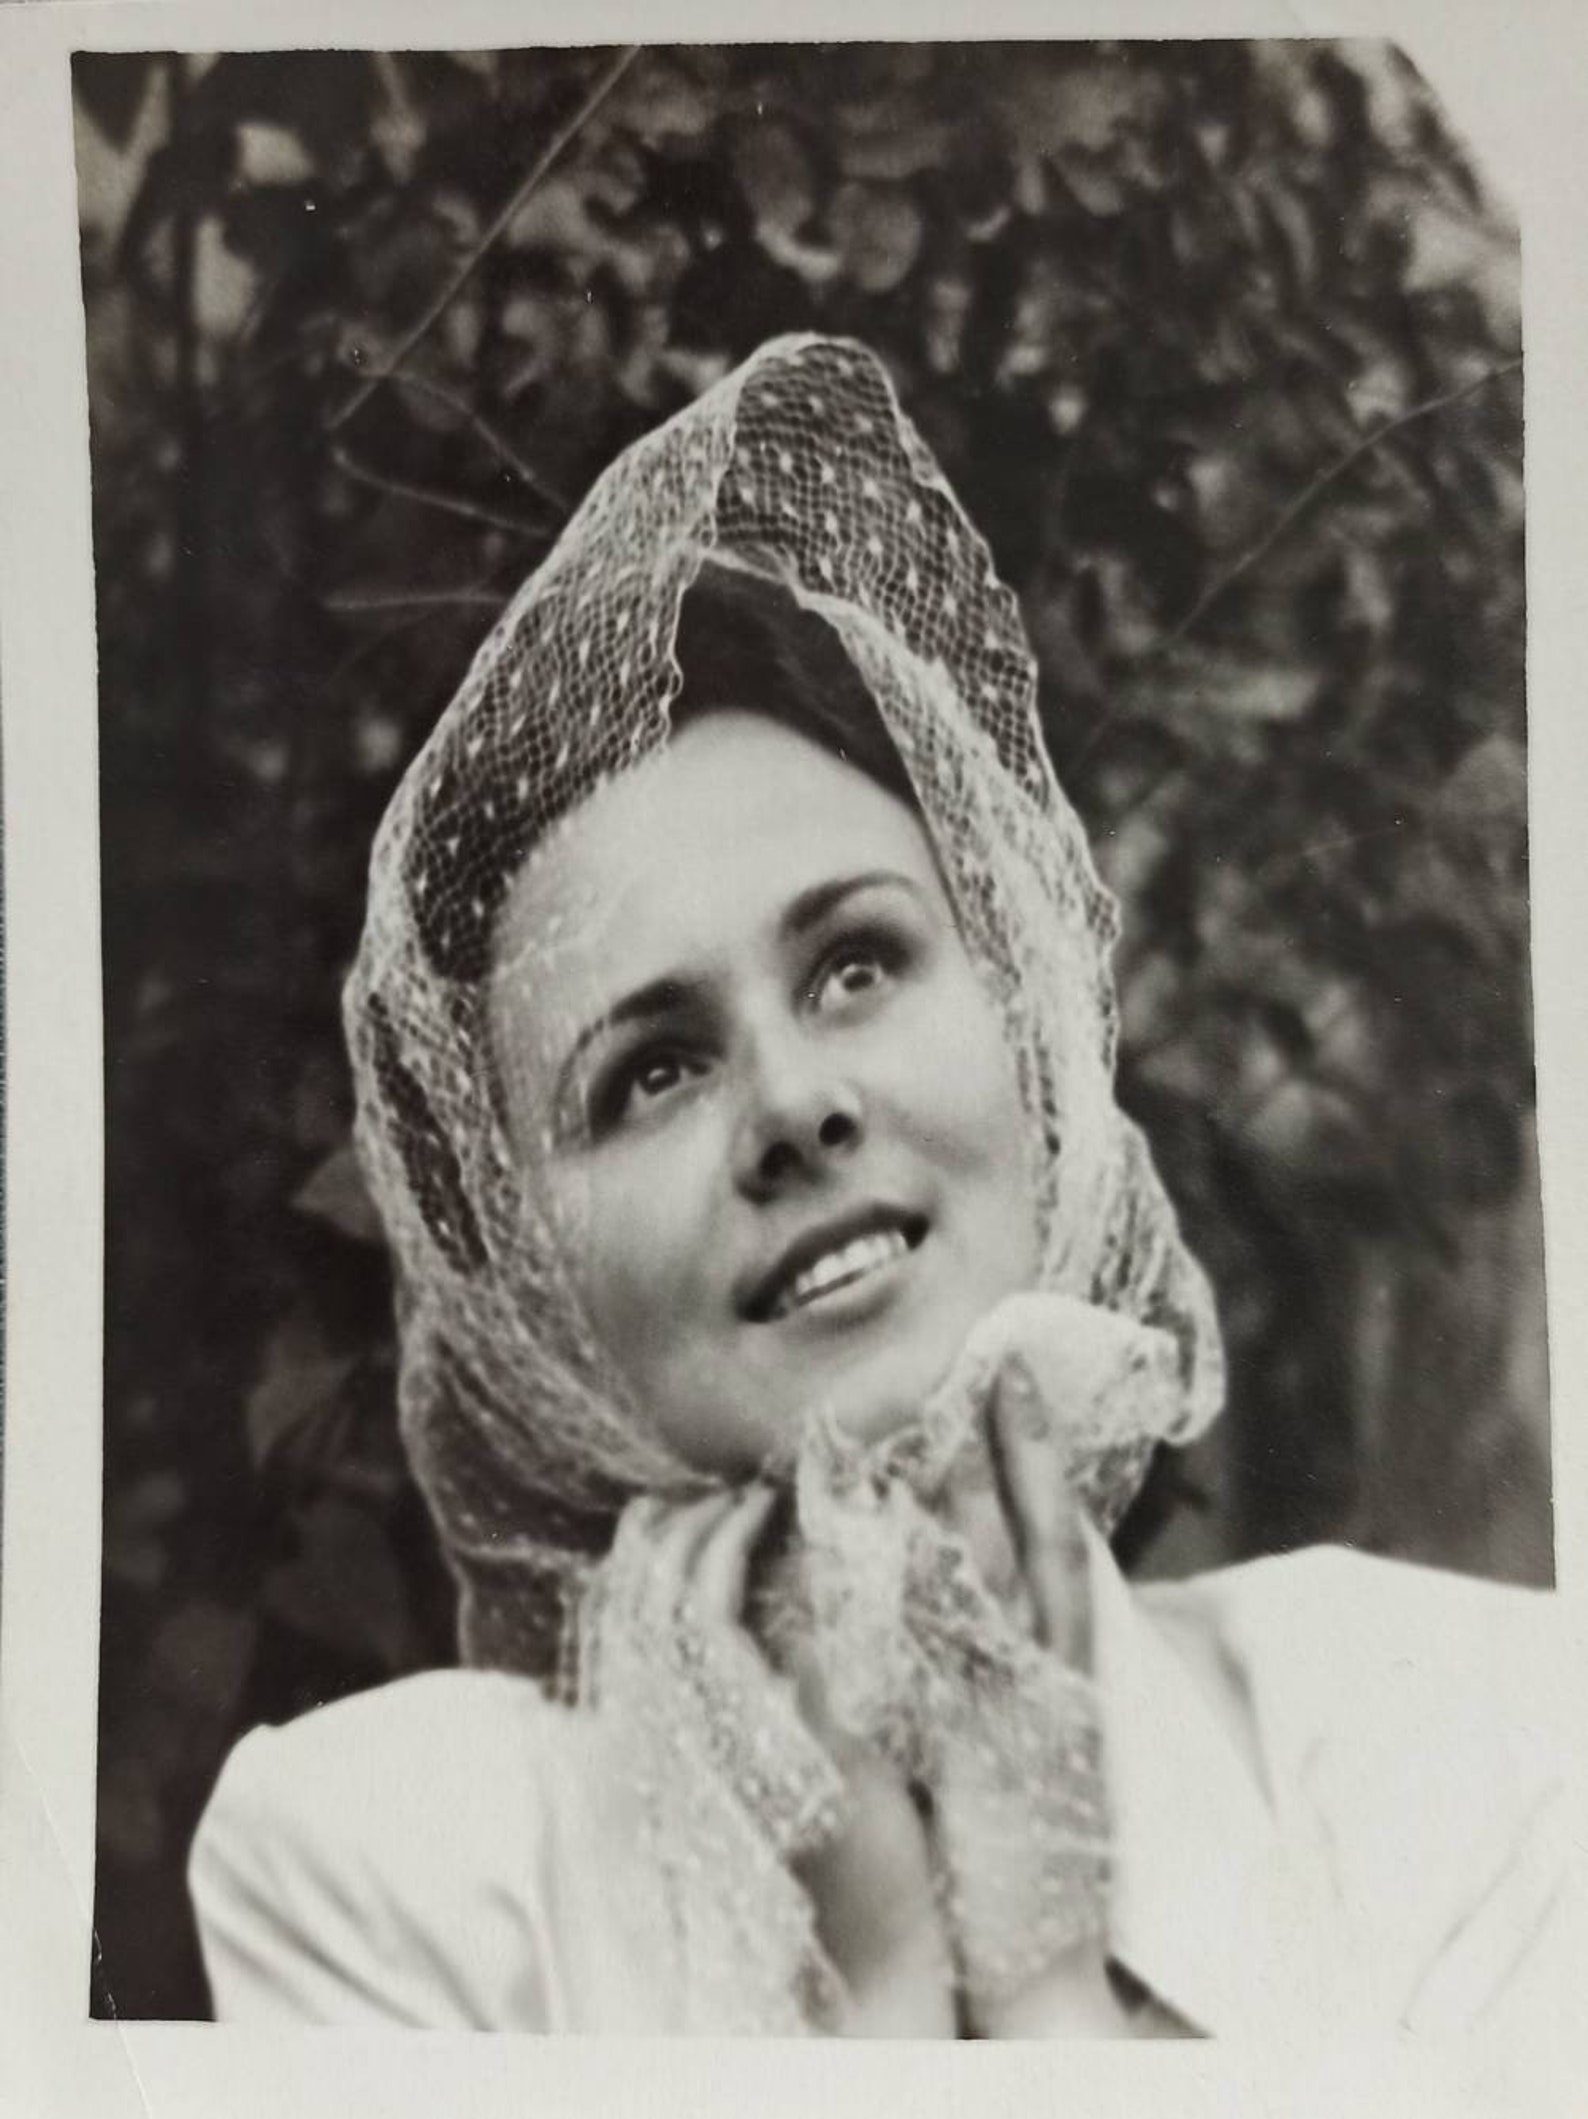 Vintage Photo Cute Girl in Headscarf Smiling - Etsy